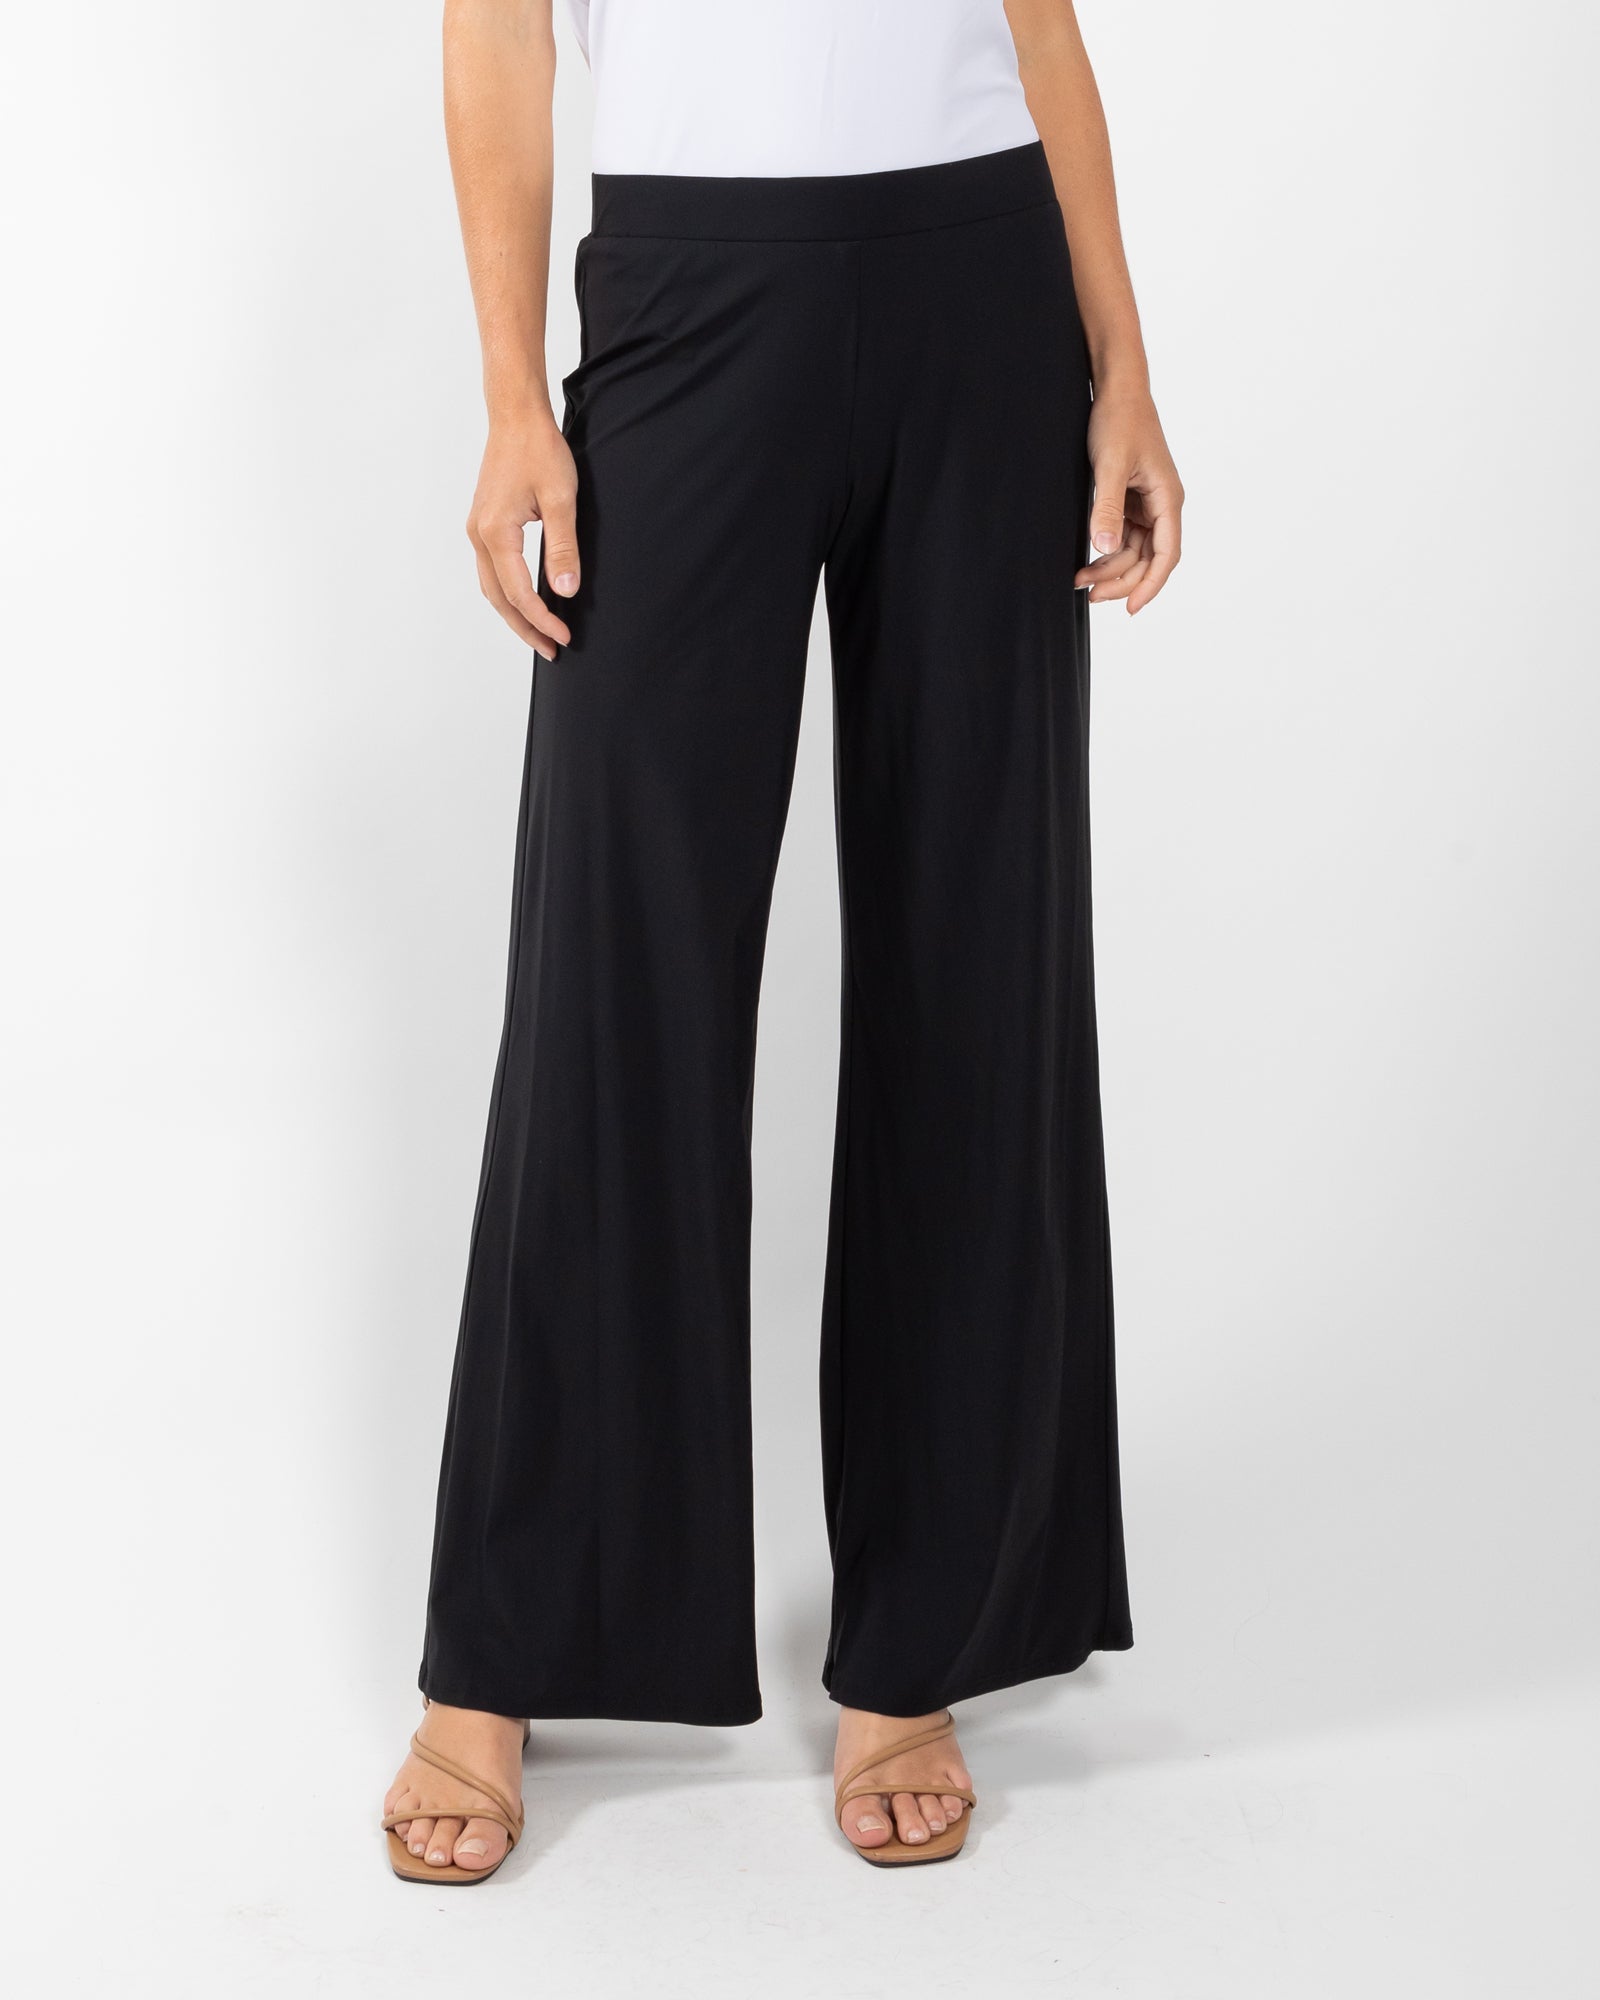 Trixie Pant - Lightweight Jude Cloth